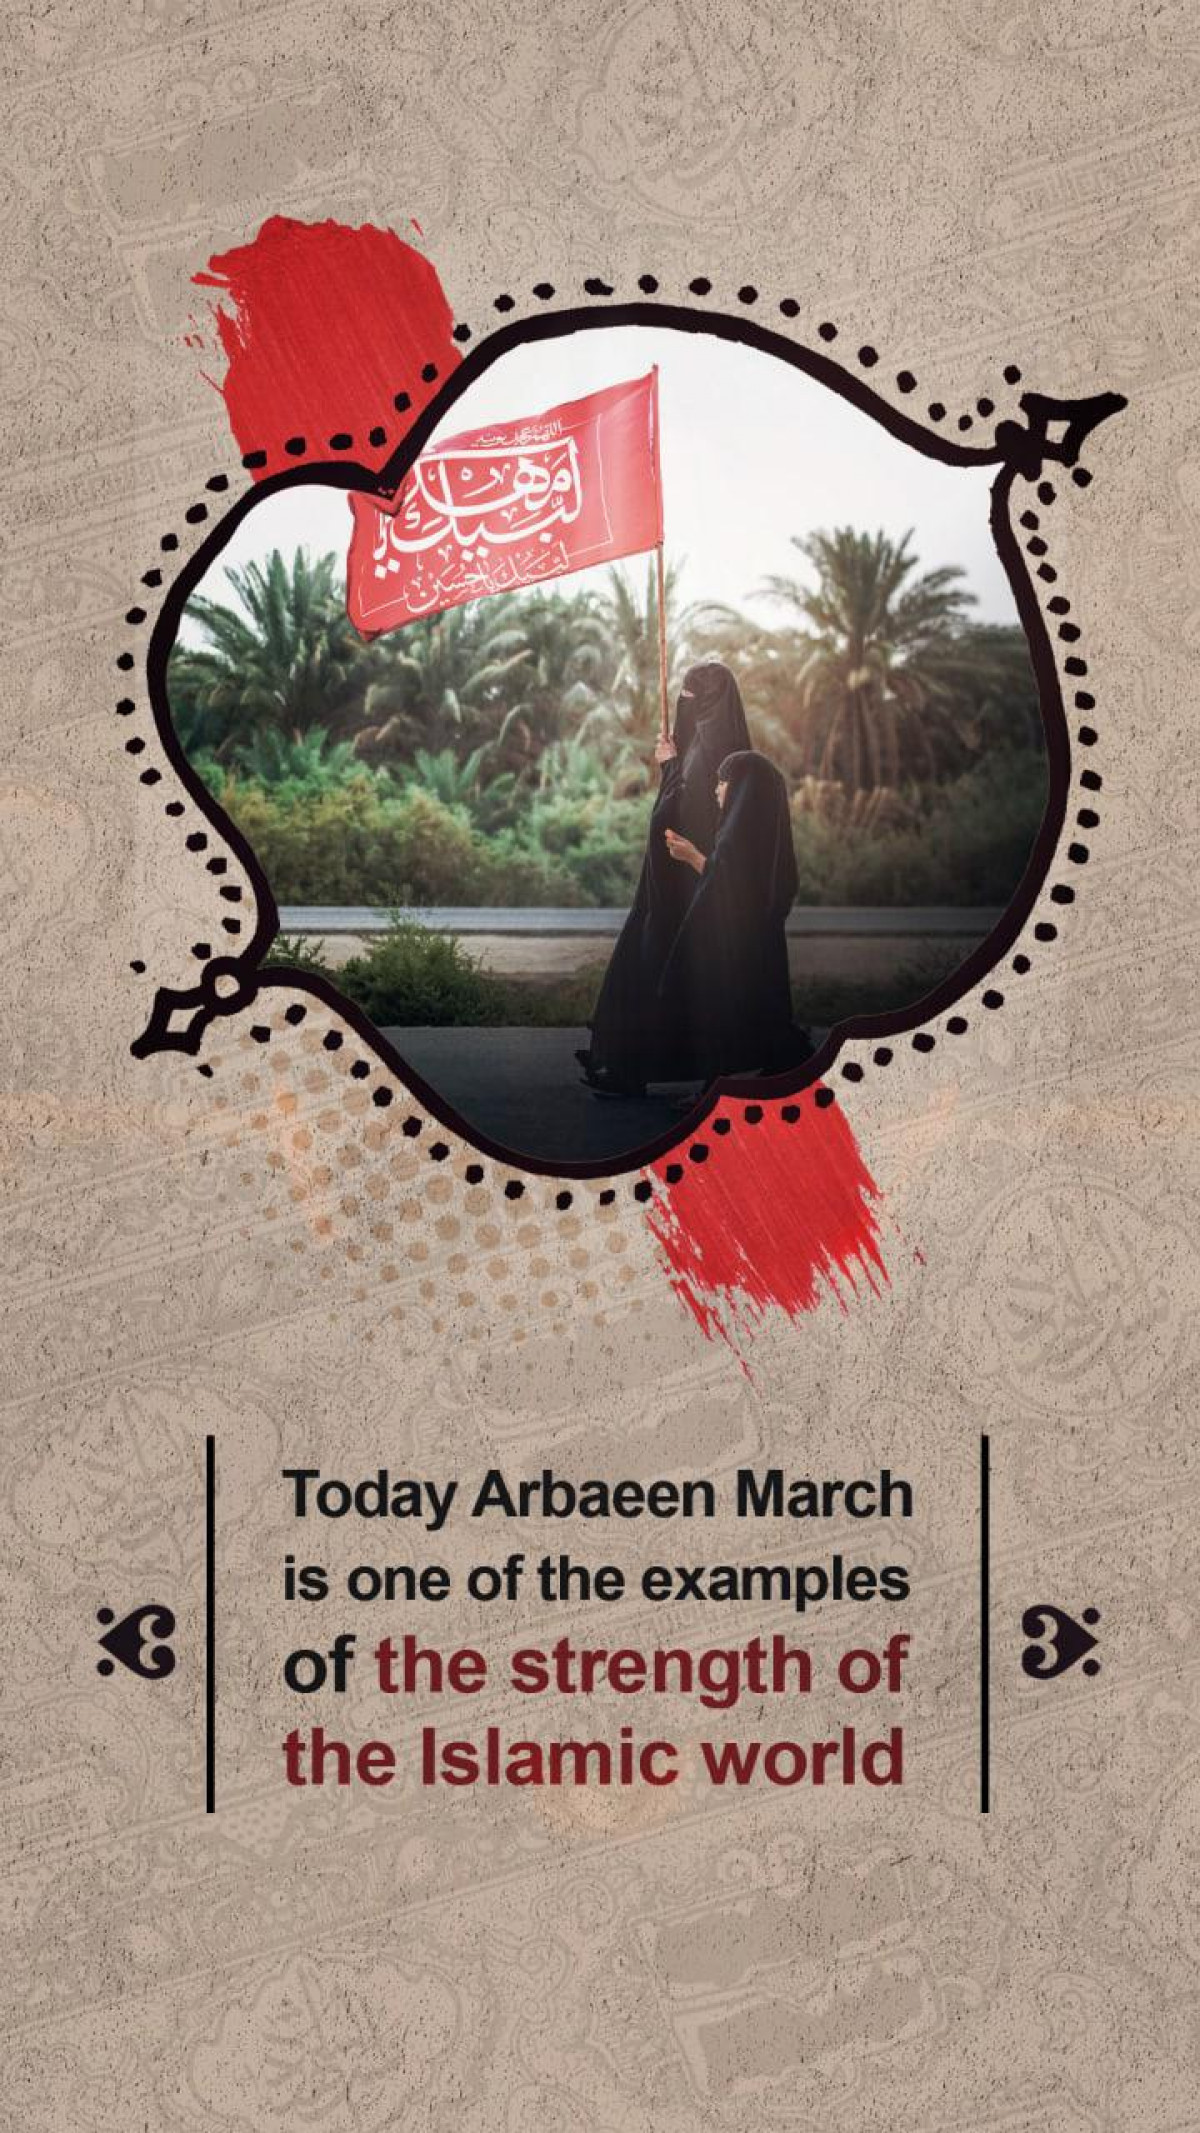 Today Arbaeen March is one of the examples of the strength of the Islamic world